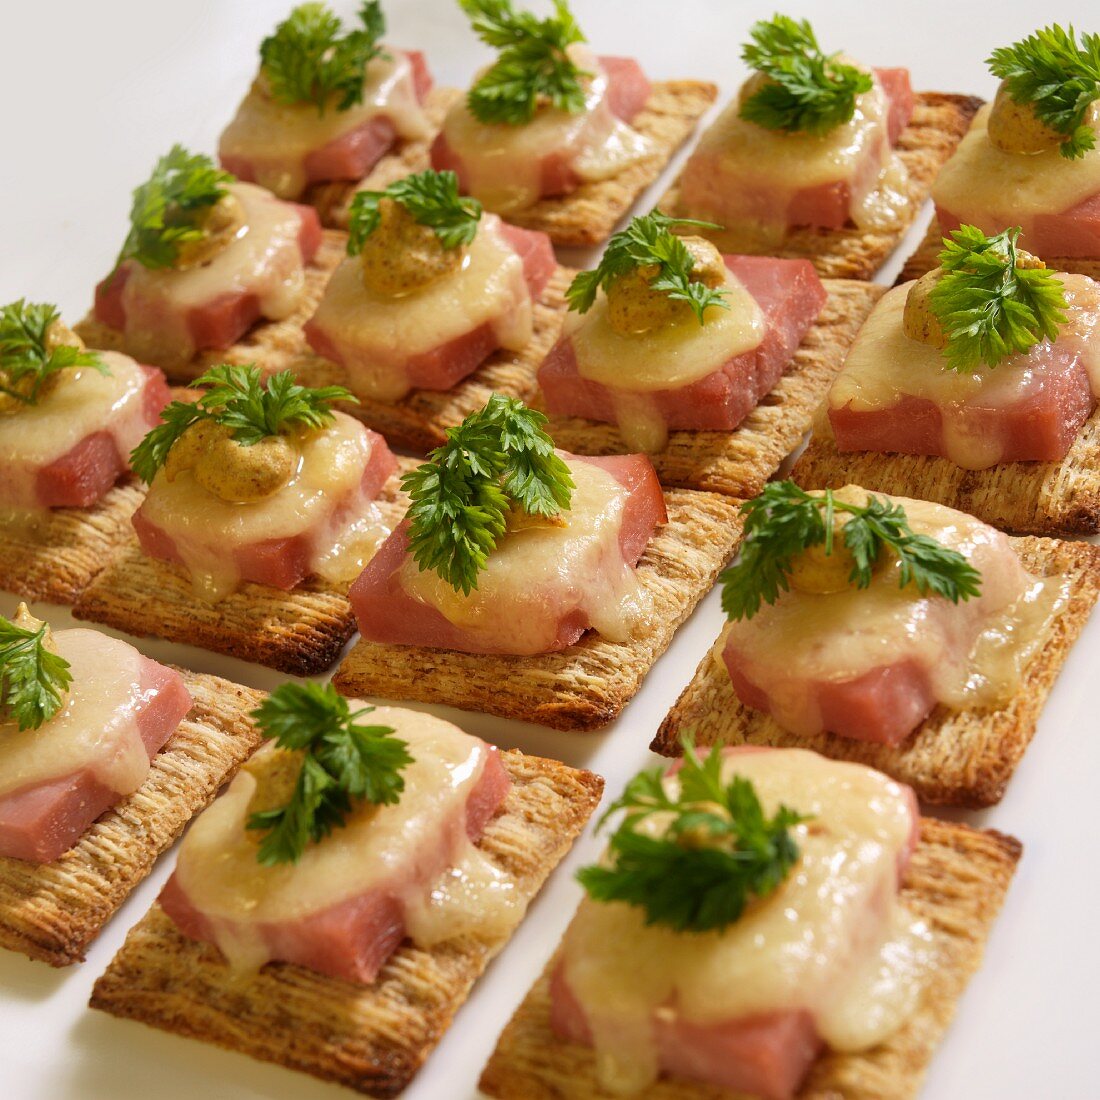 Crackers with ham, Swiss cheese, mustard and chervil